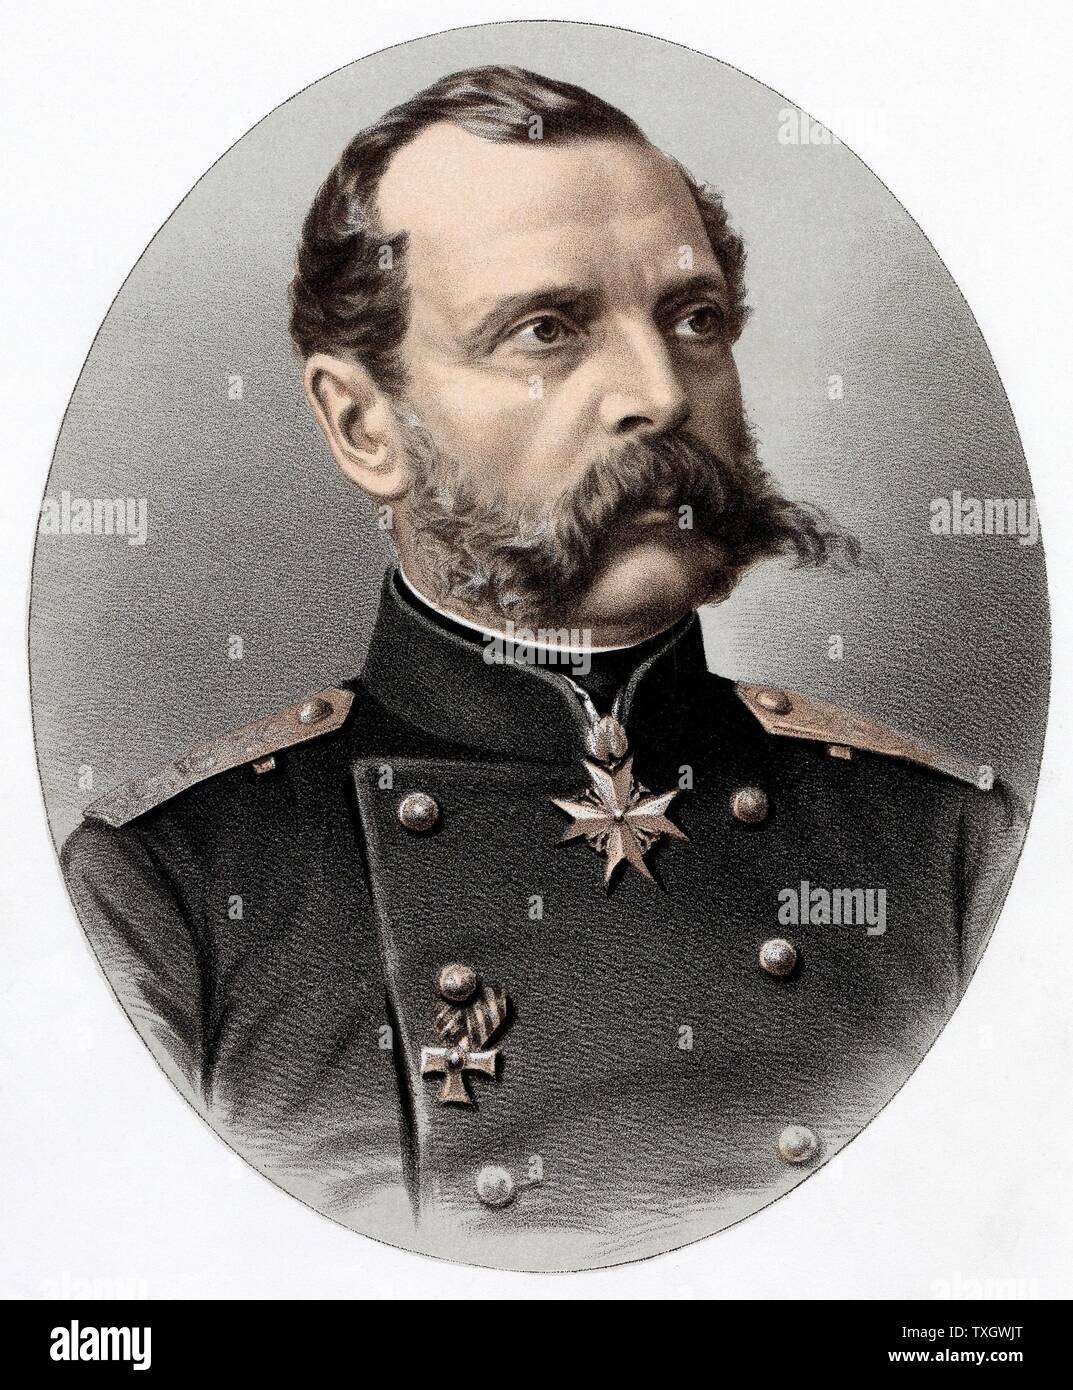 Alexander II (1818-1881) Tsar of Russia from 1855. Known as 'The Liberator'. Emancipated the serfs in 1861. Assassinated.   c1880 Tinted lithograph Stock Photo